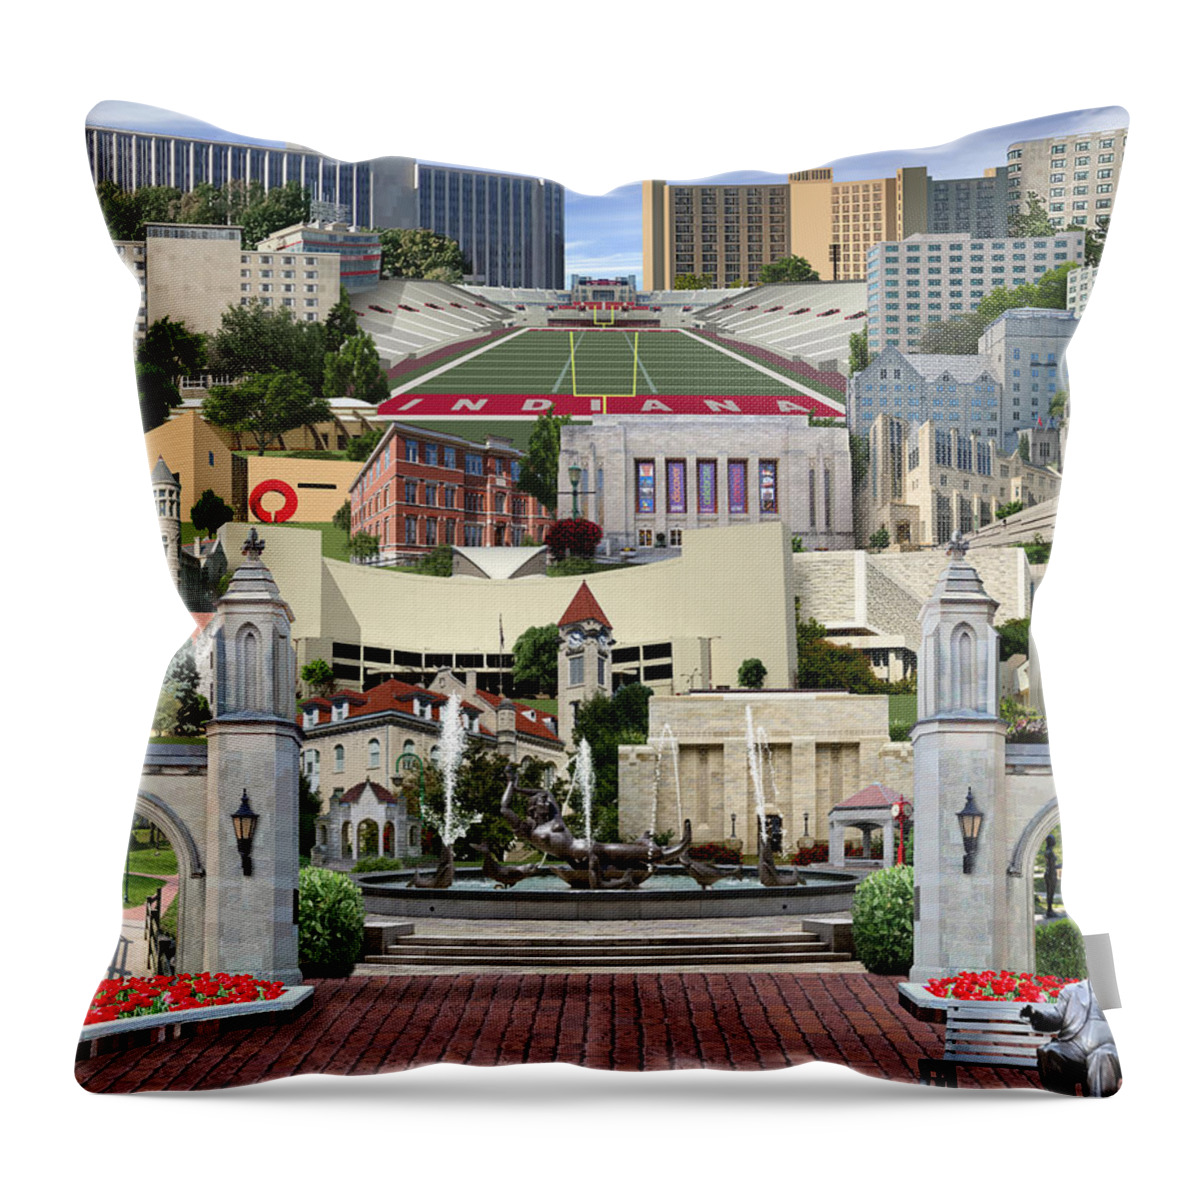 Indiana University Throw Pillow featuring the digital art Indiana University Campus by Dave Lee